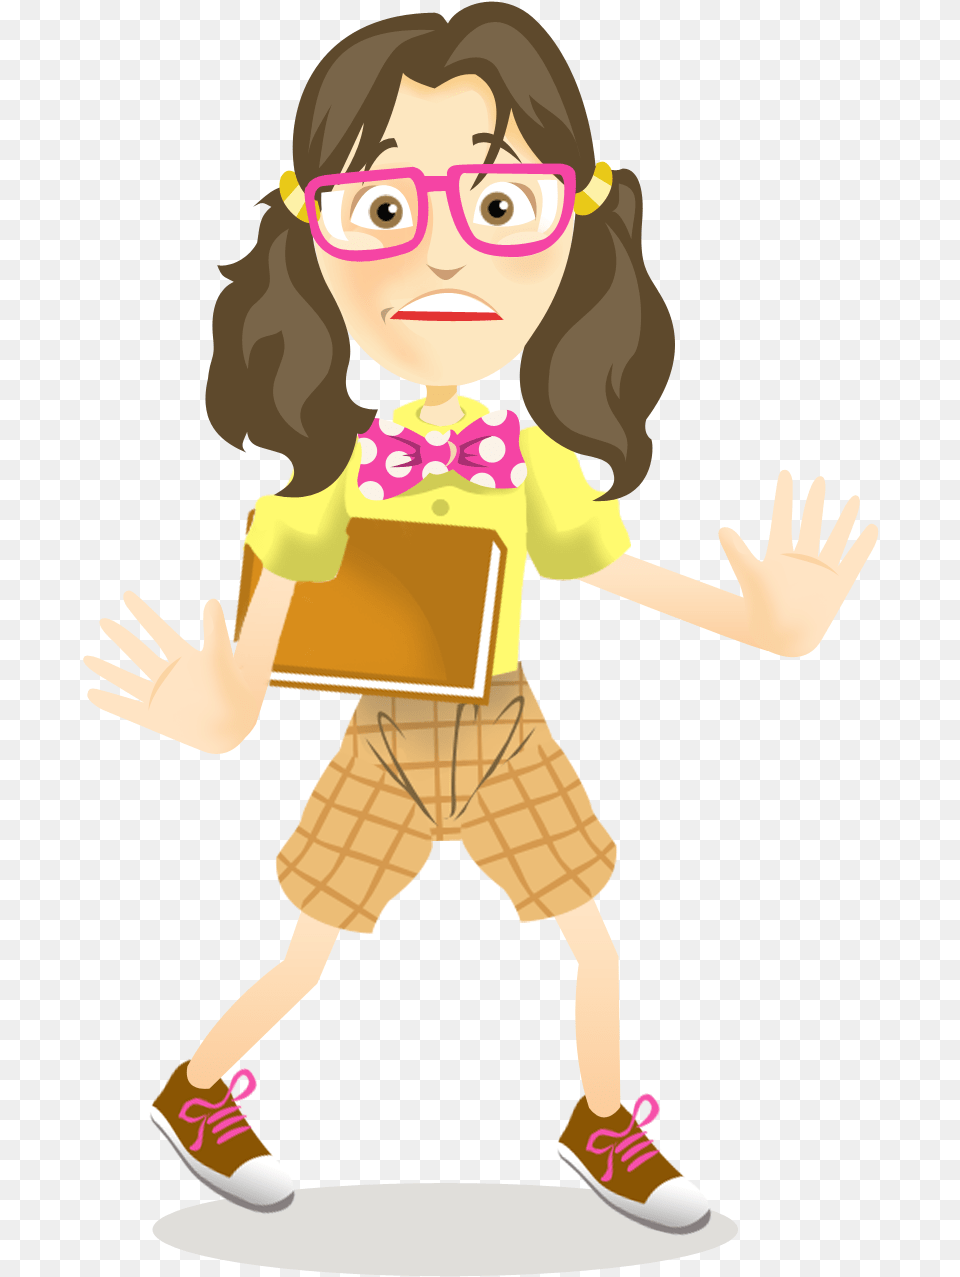 Wpgeek Girl 2 Geek Girl, Baby, Person, Face, Head Free Png Download